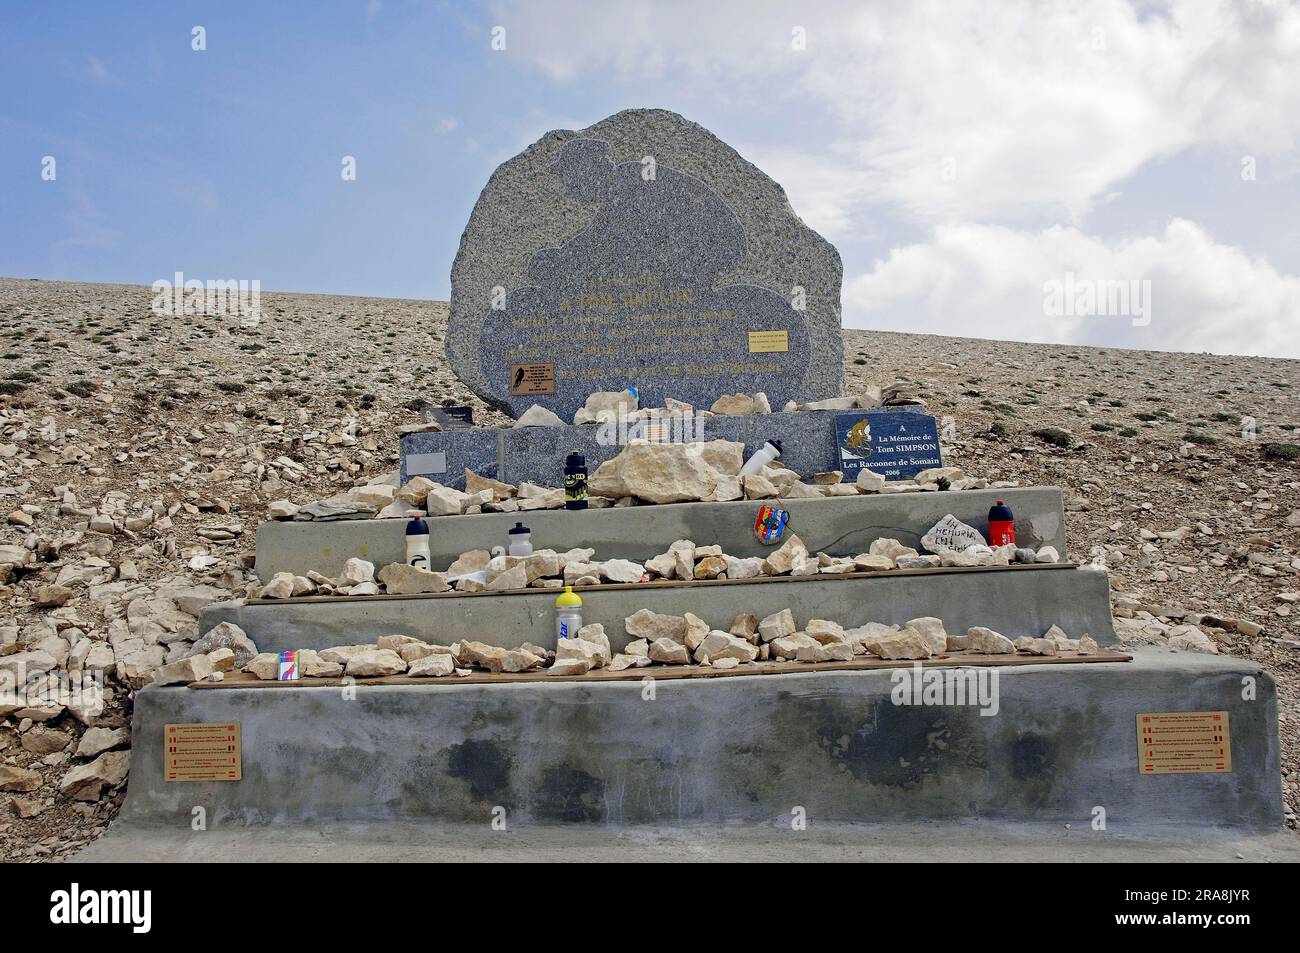 Monument to professional cyclist Tom Simpson on Mont Ventoux, Vaucluse, Provence-Alpes-Cote d'Azur, southern France, windy mountain, memorial Stock Photo